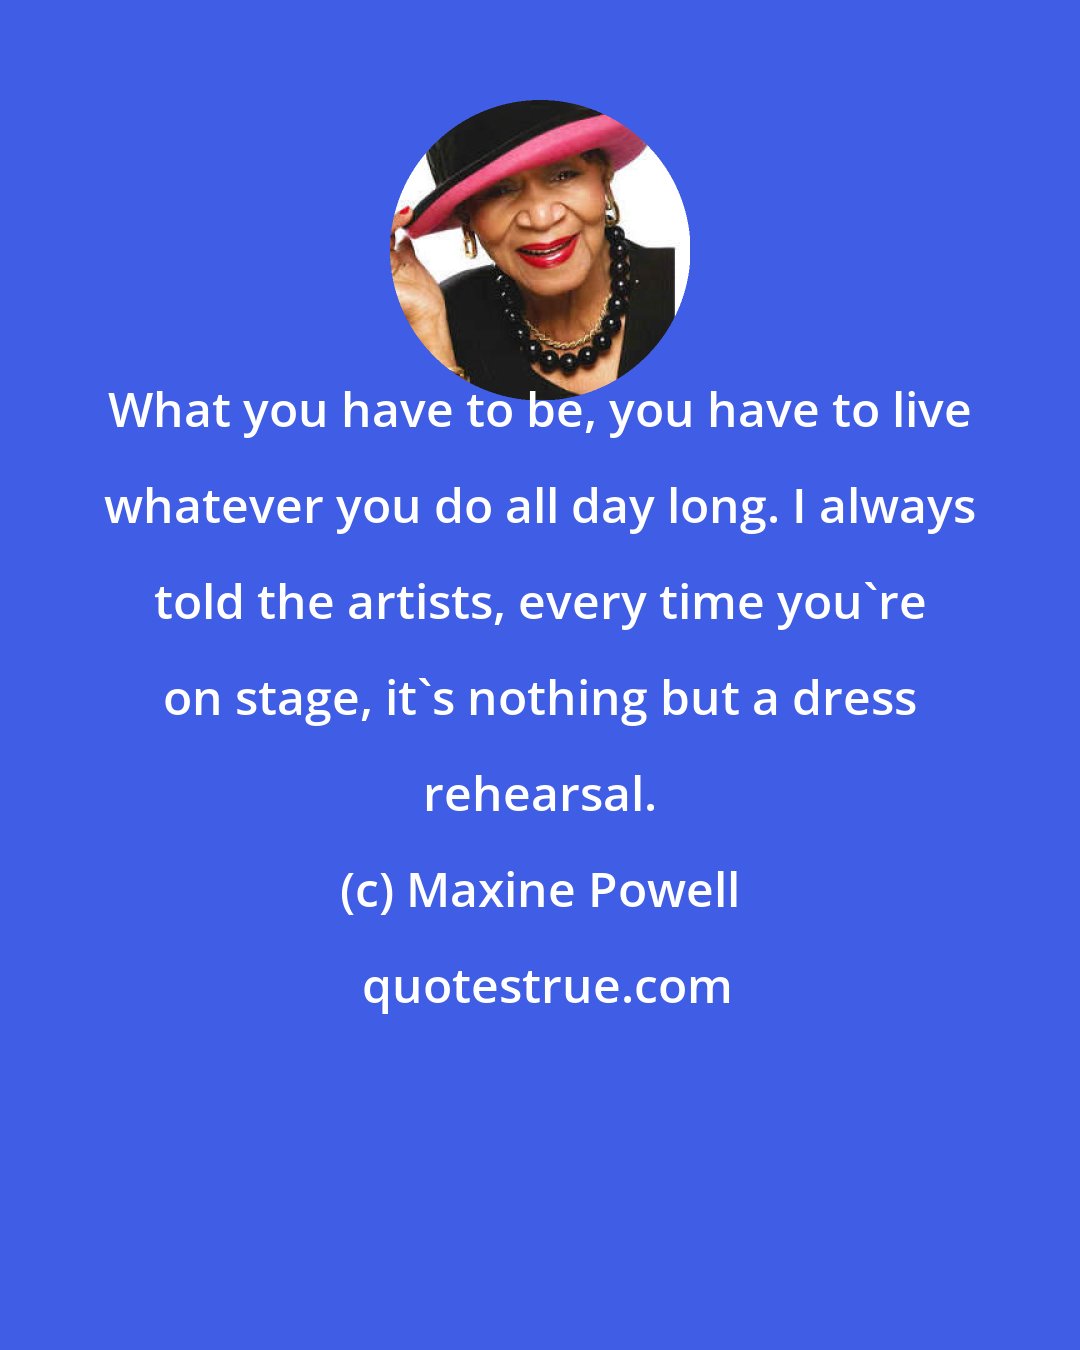 Maxine Powell: What you have to be, you have to live whatever you do all day long. I always told the artists, every time you're on stage, it's nothing but a dress rehearsal.